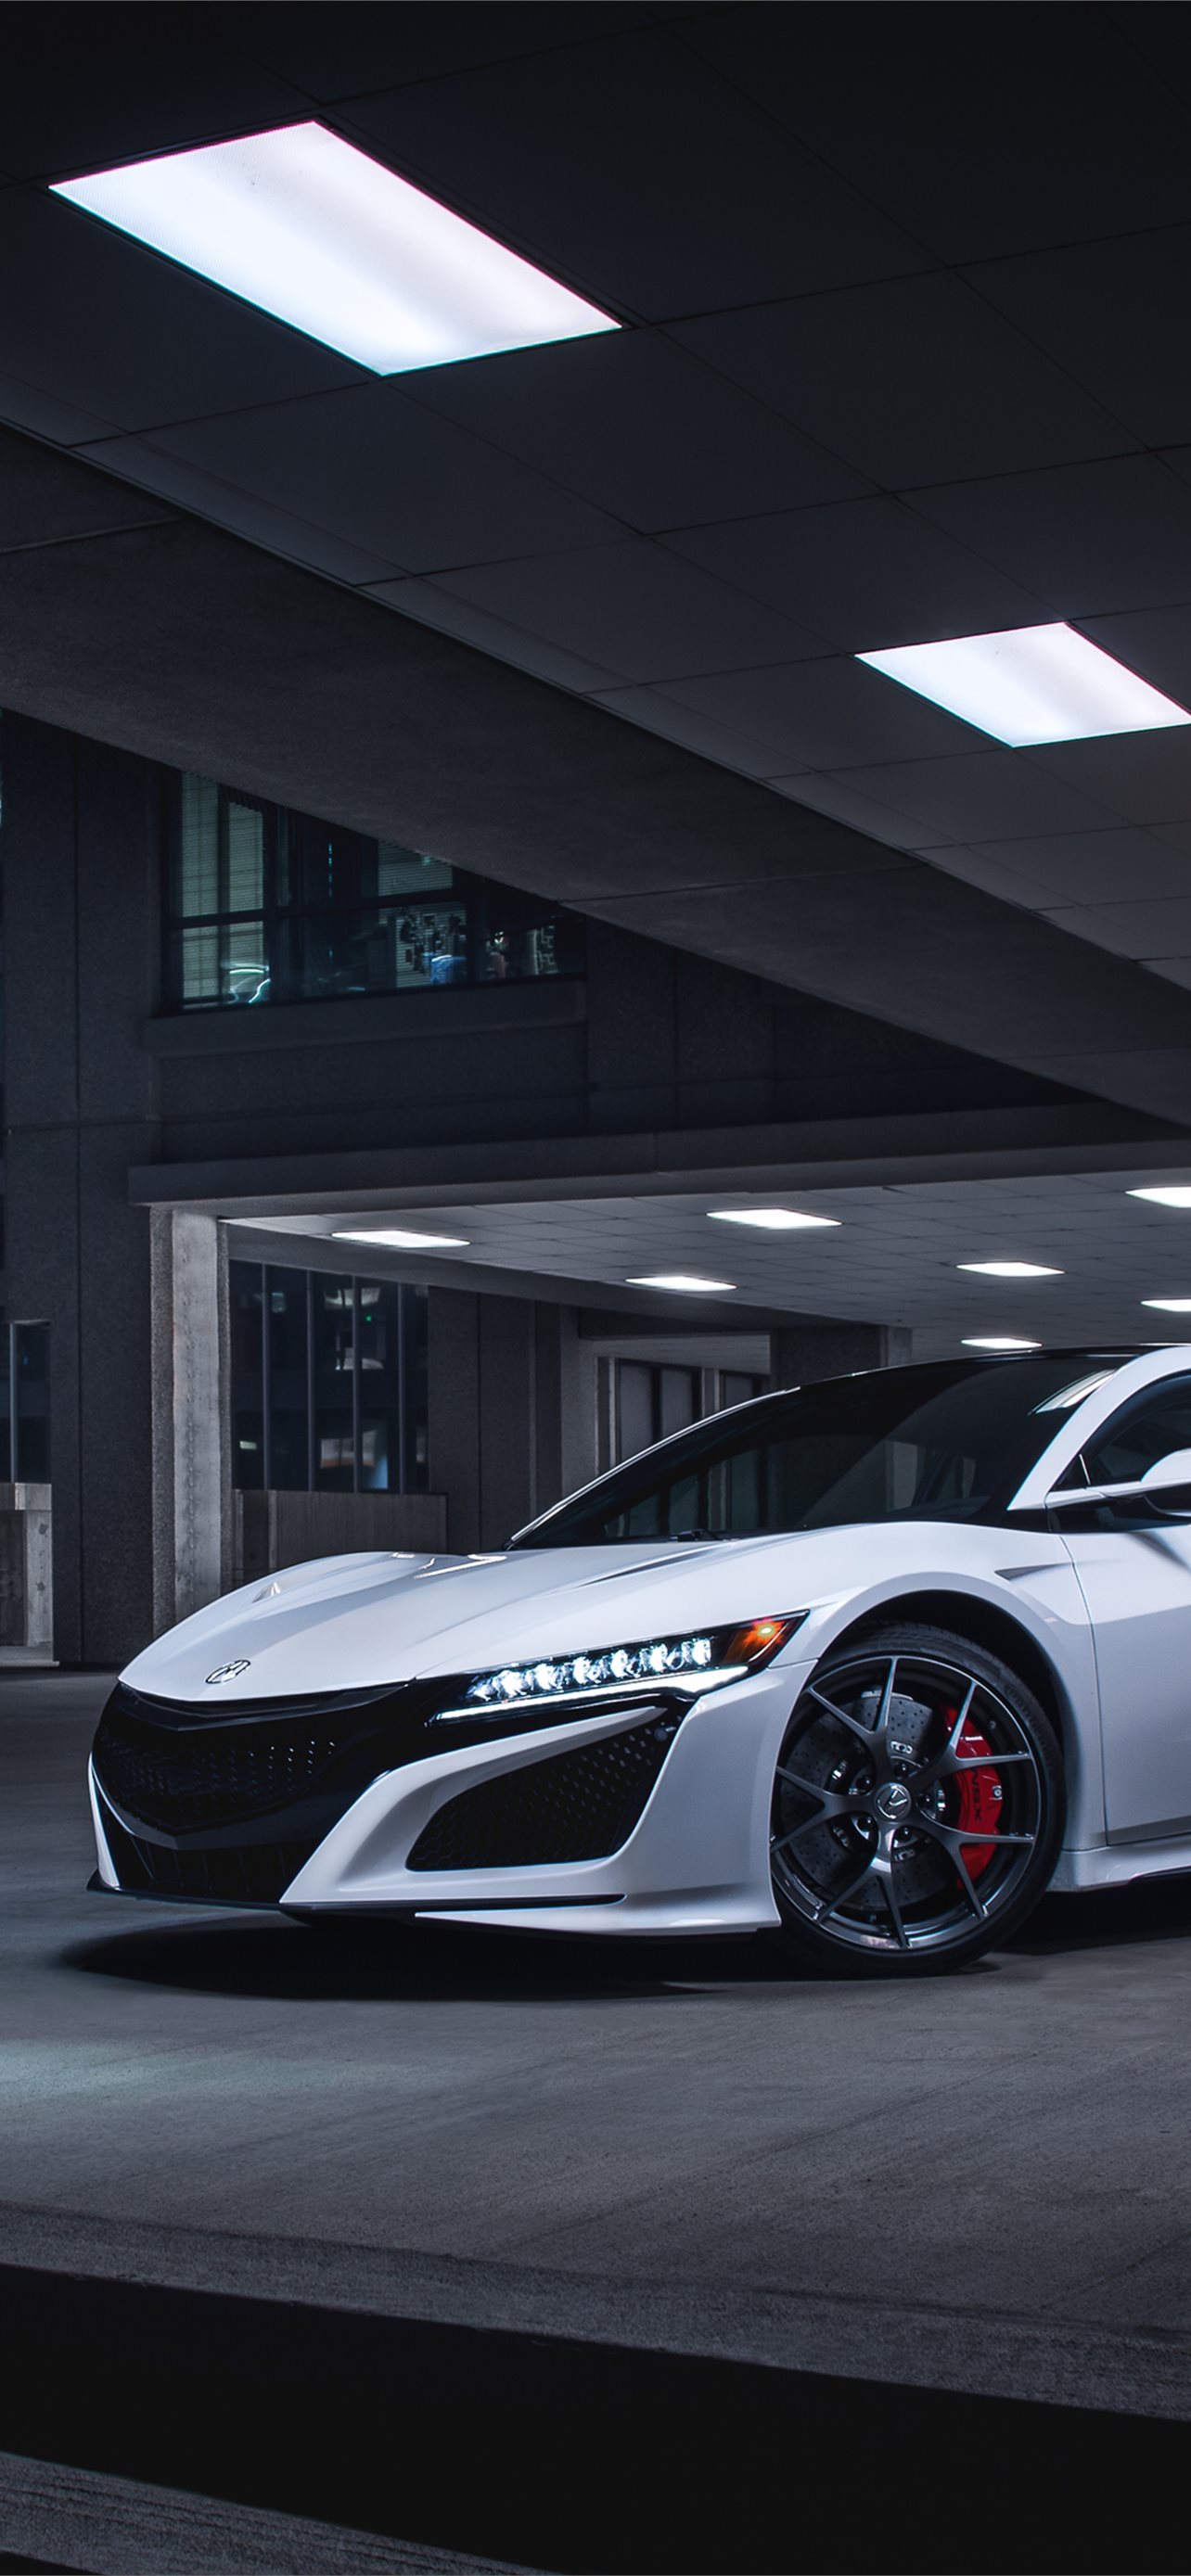 Acura Nsx 19 Samsung Galaxy Note 9 8 S9 S8 S8 Qh Iphone Wallpapers Free Download